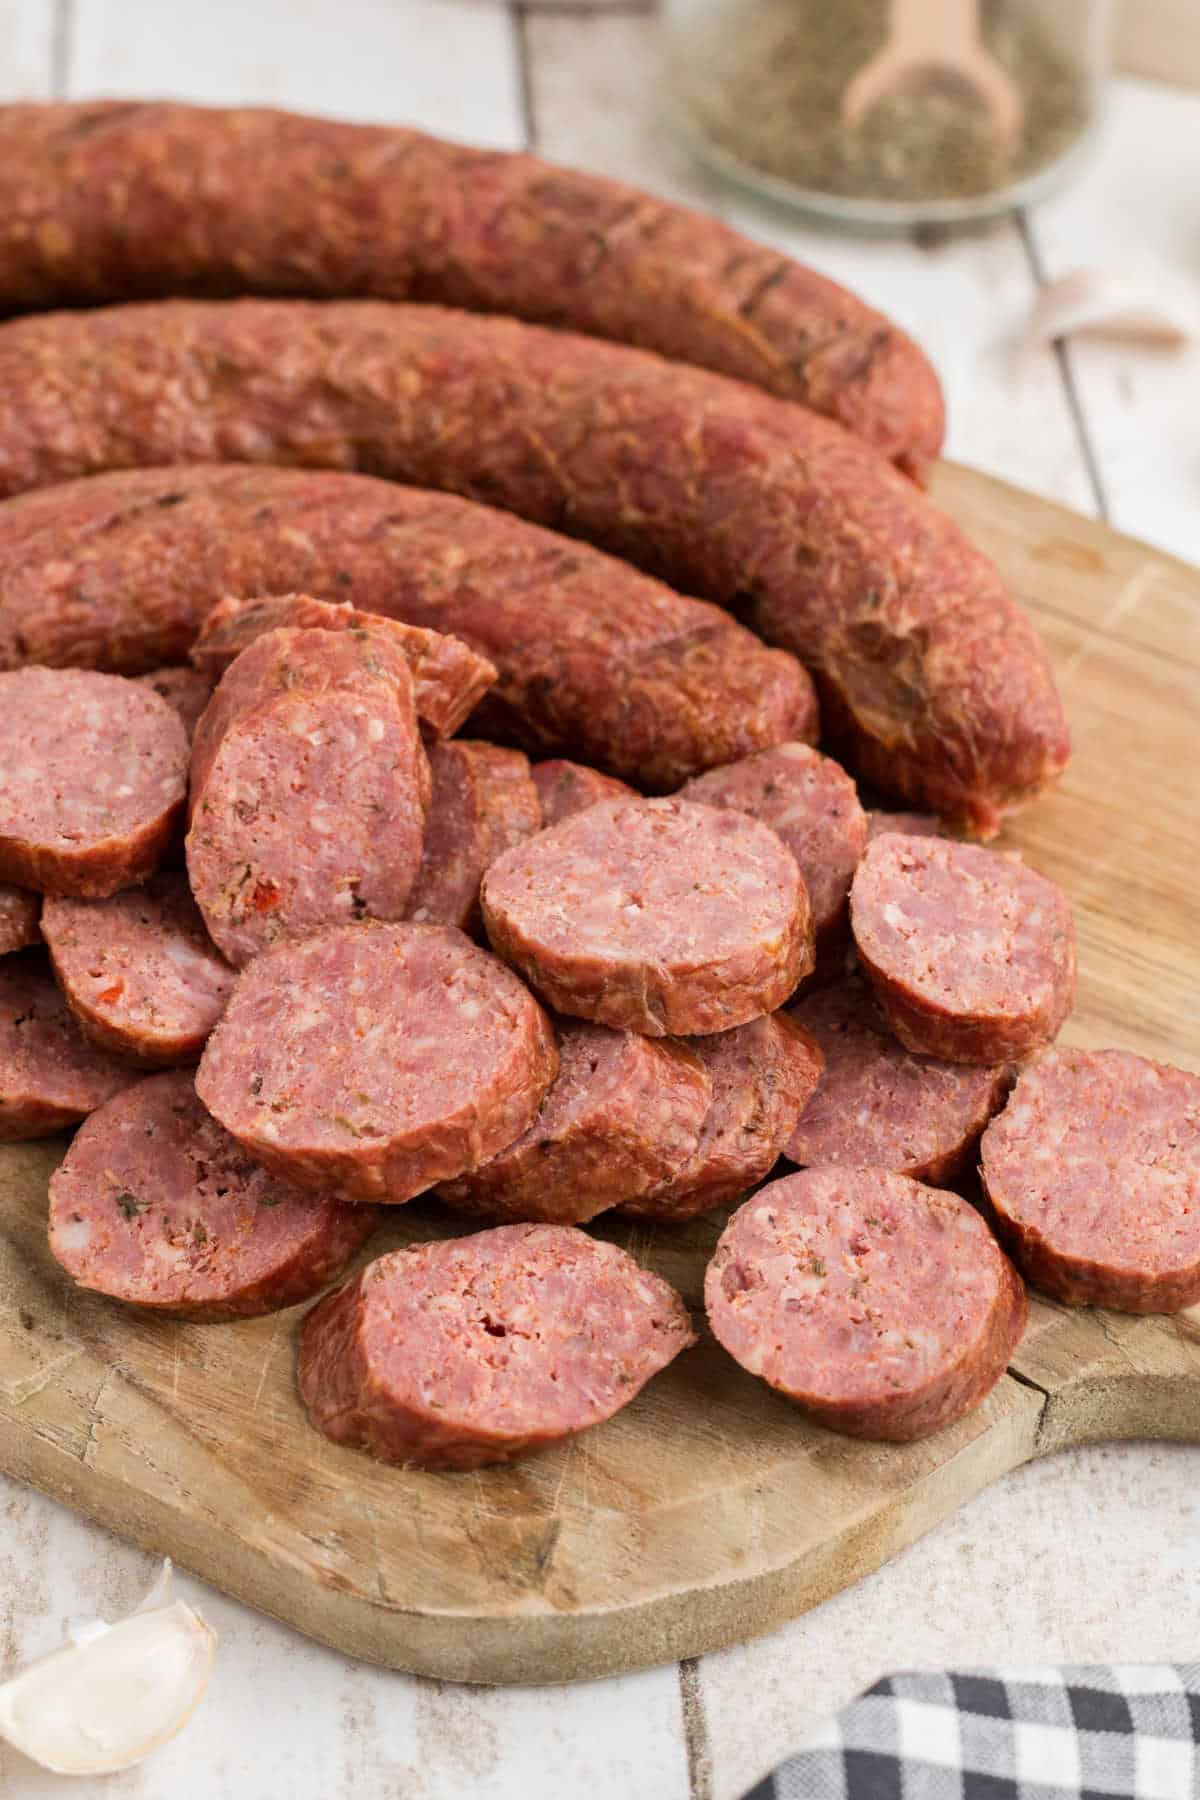 A chopping board with some andouille sausage sliced into coins.